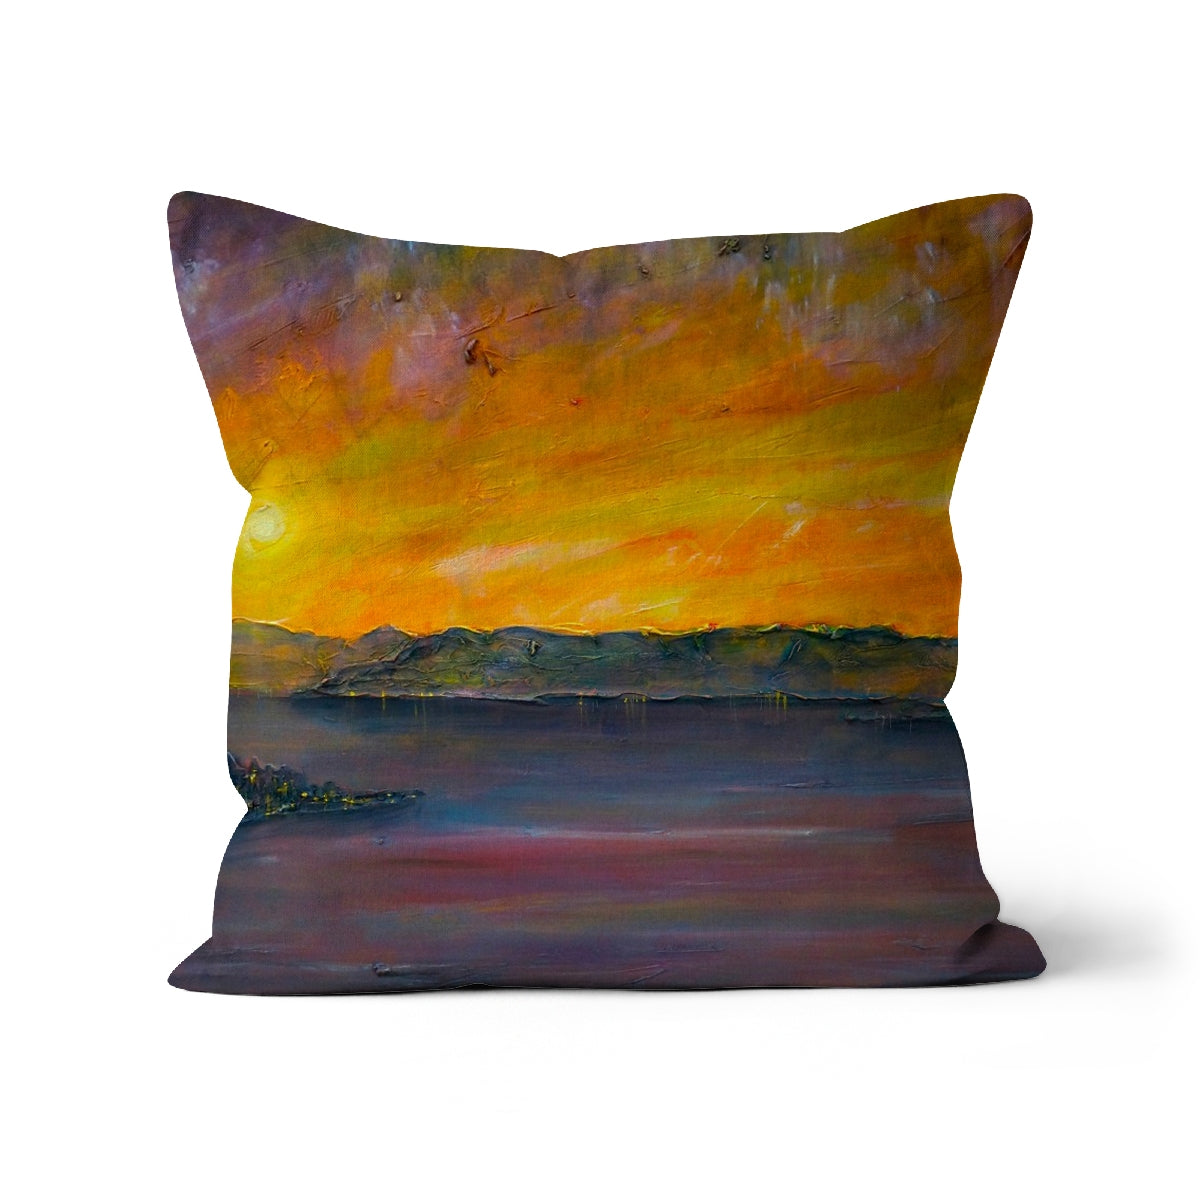 Sunset Over Gourock Art Gifts Cushion-Cushions-River Clyde Art Gallery-Faux Suede-16"x16"-Paintings, Prints, Homeware, Art Gifts From Scotland By Scottish Artist Kevin Hunter